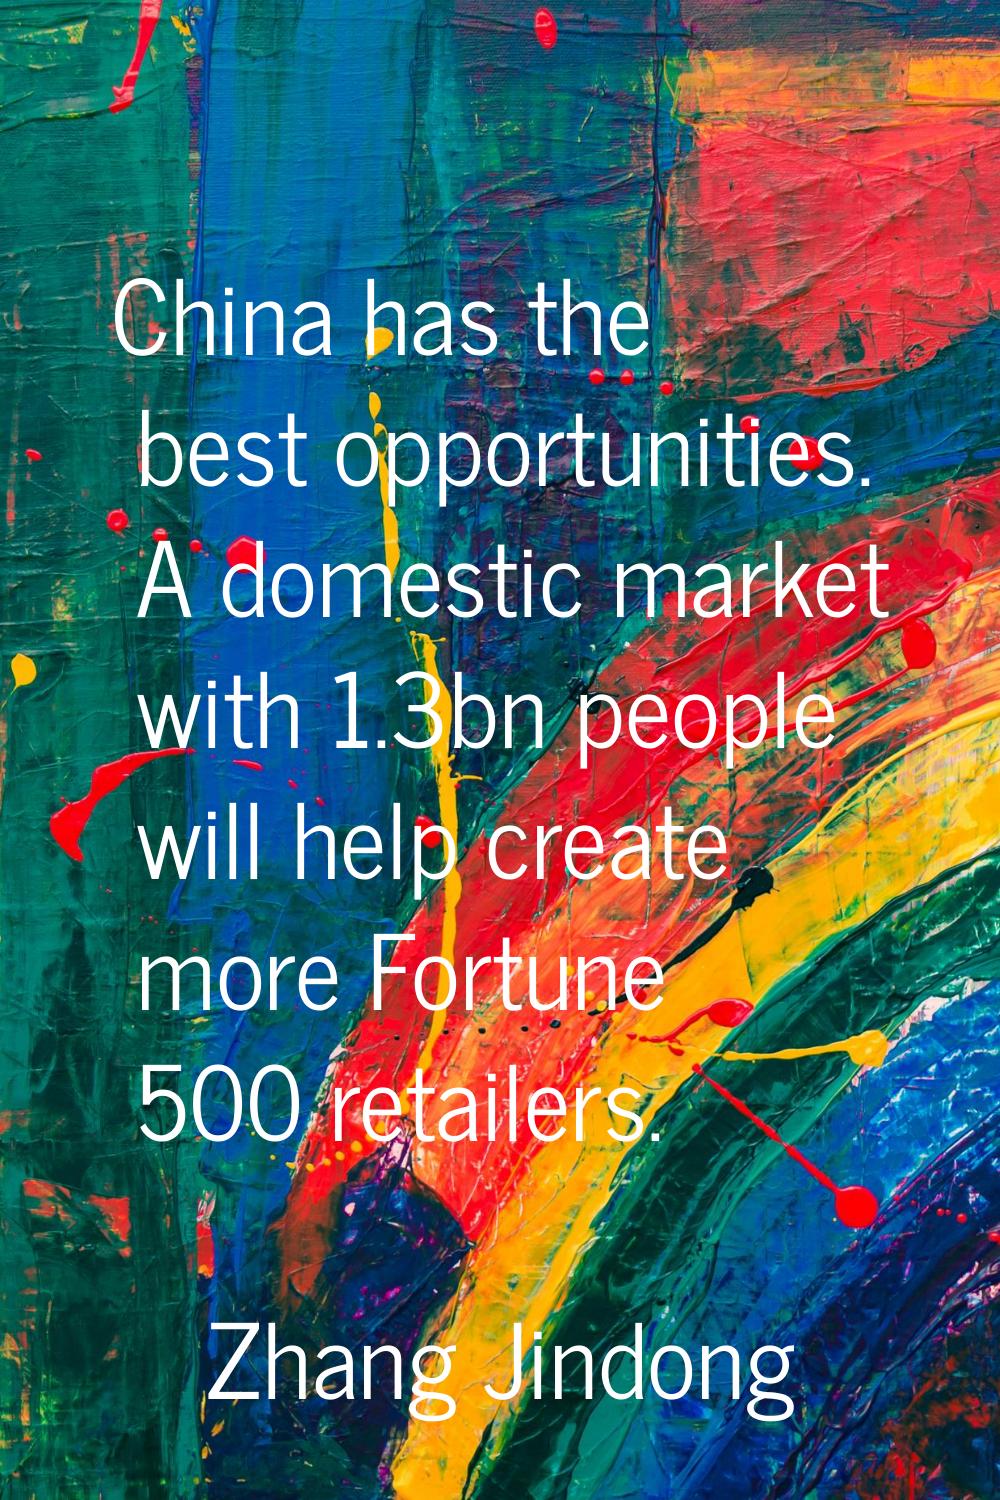 China has the best opportunities. A domestic market with 1.3bn people will help create more Fortune